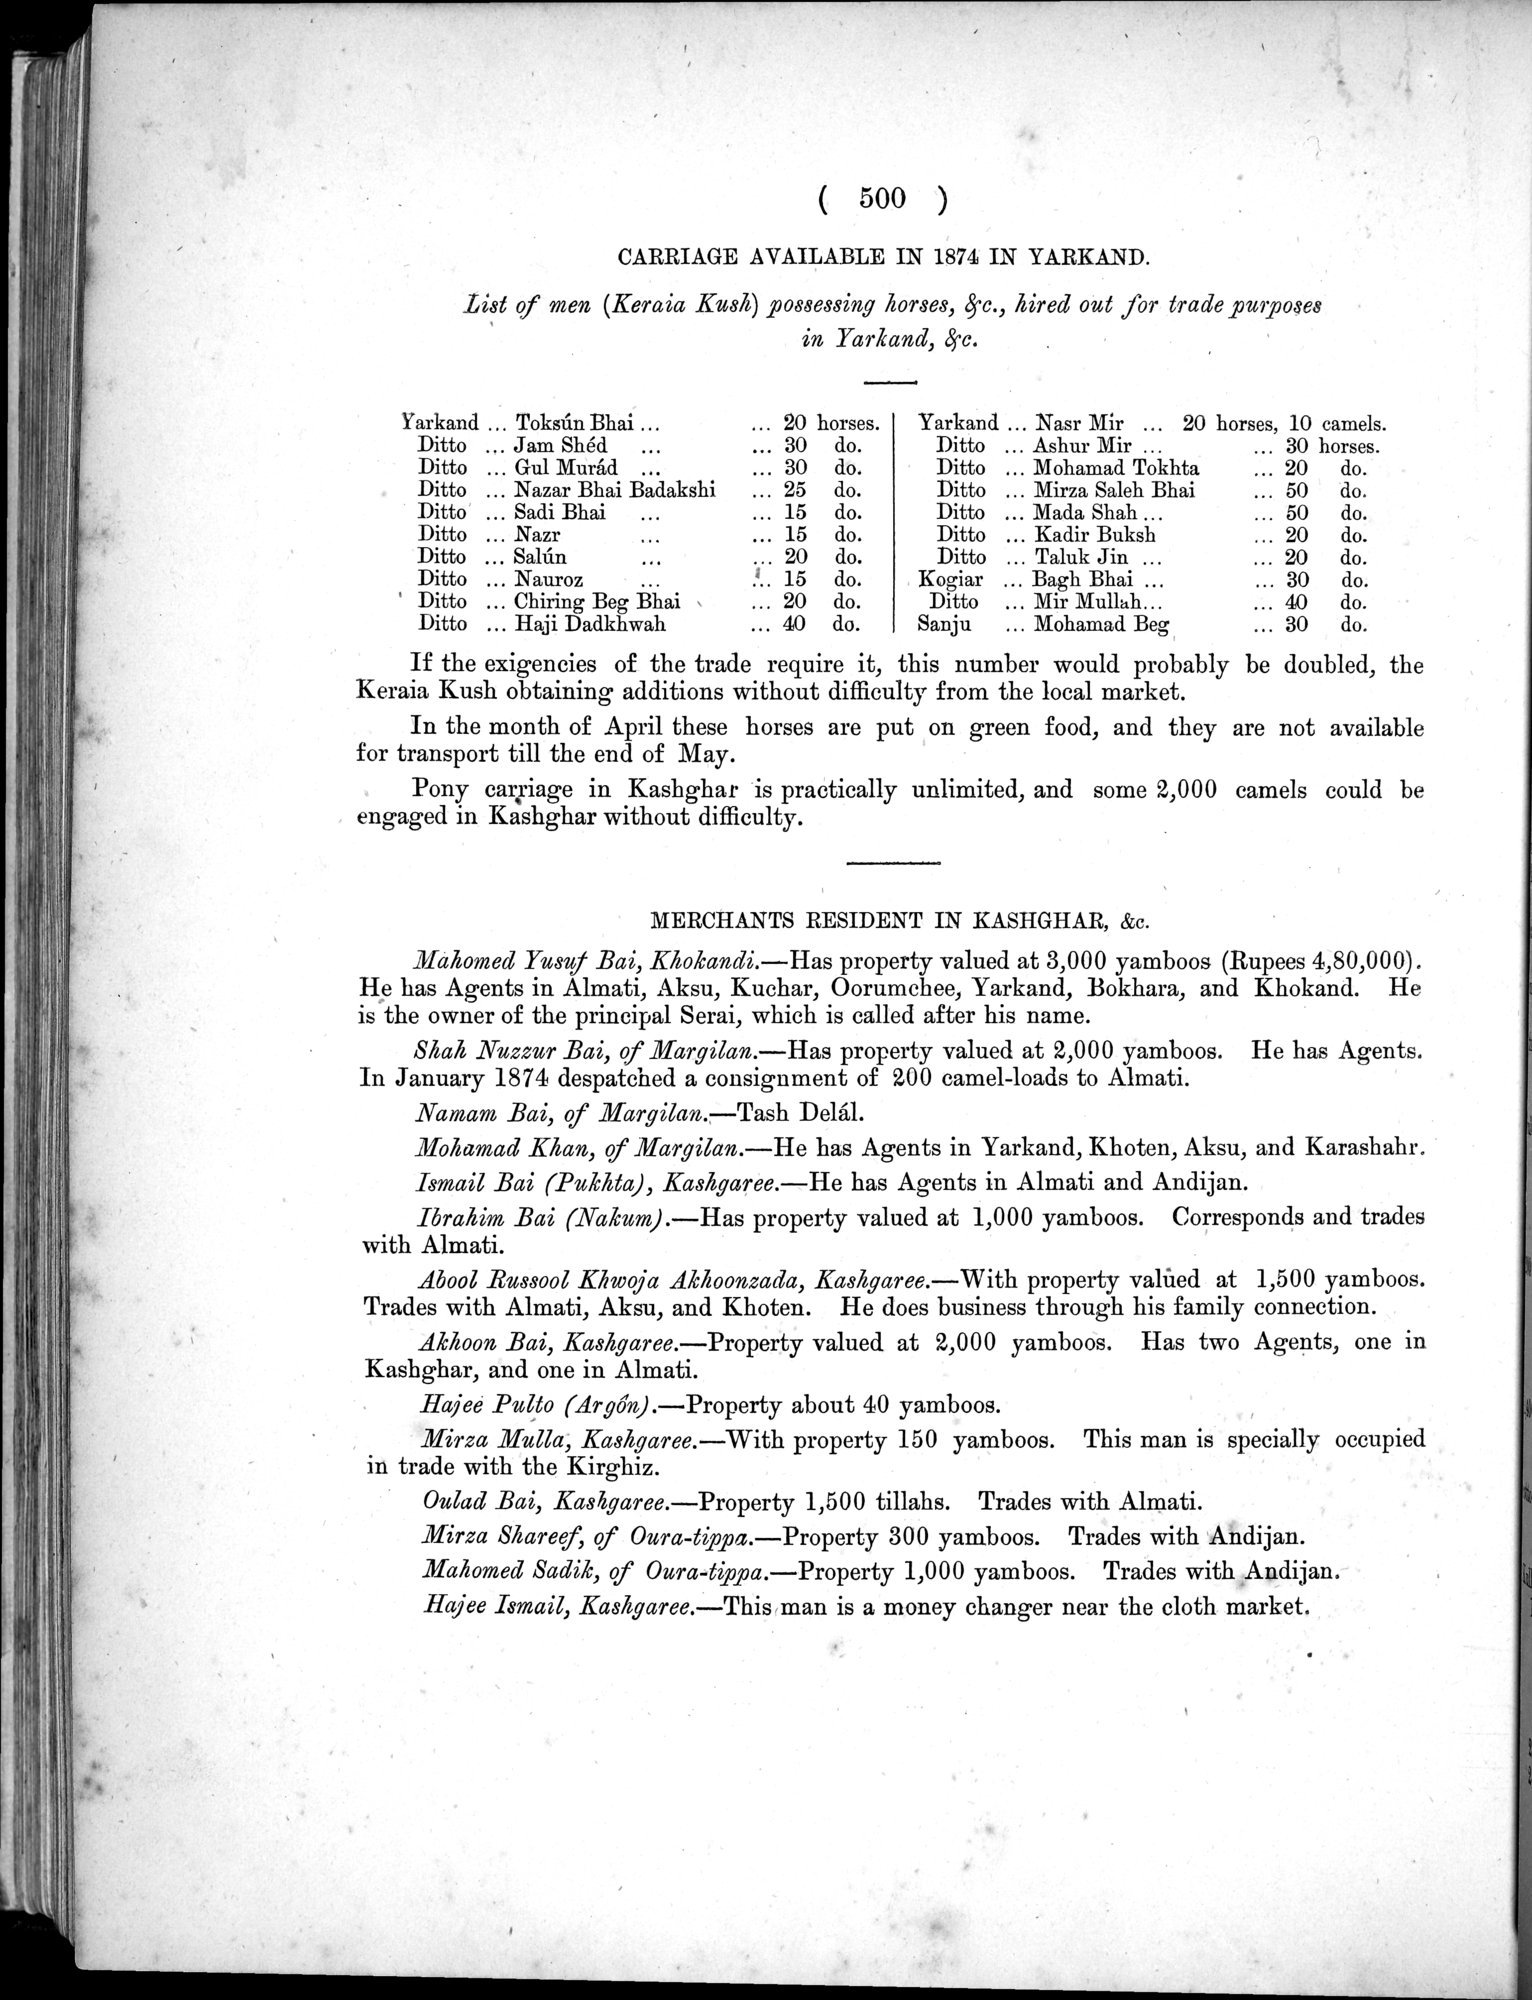 Report of a Mission to Yarkund in 1873 : vol.1 / Page 634 (Grayscale High Resolution Image)